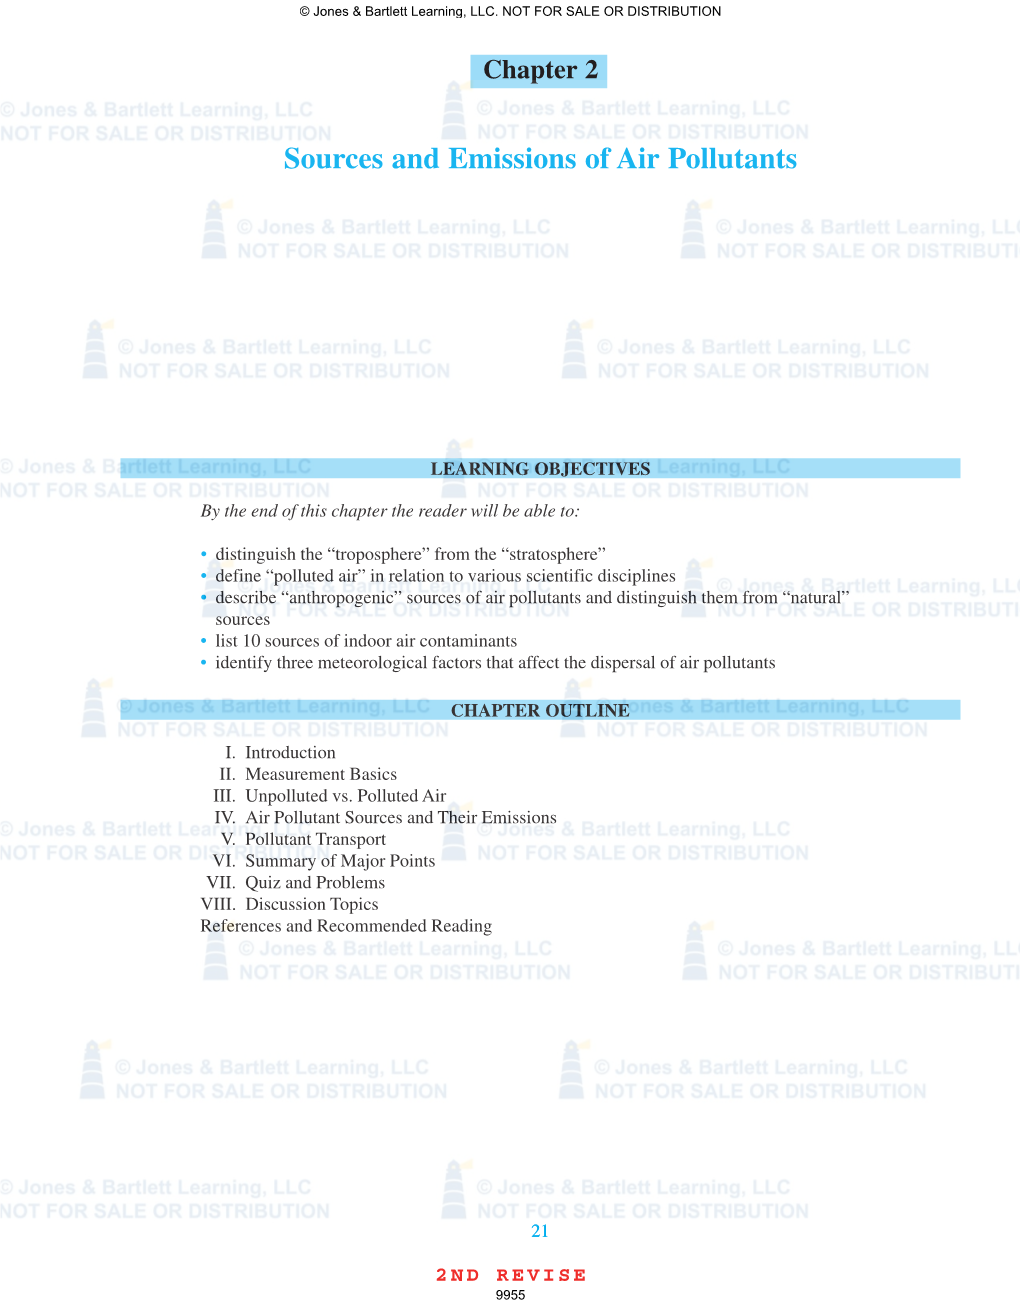 Sources and Emissions of Air Pollutants